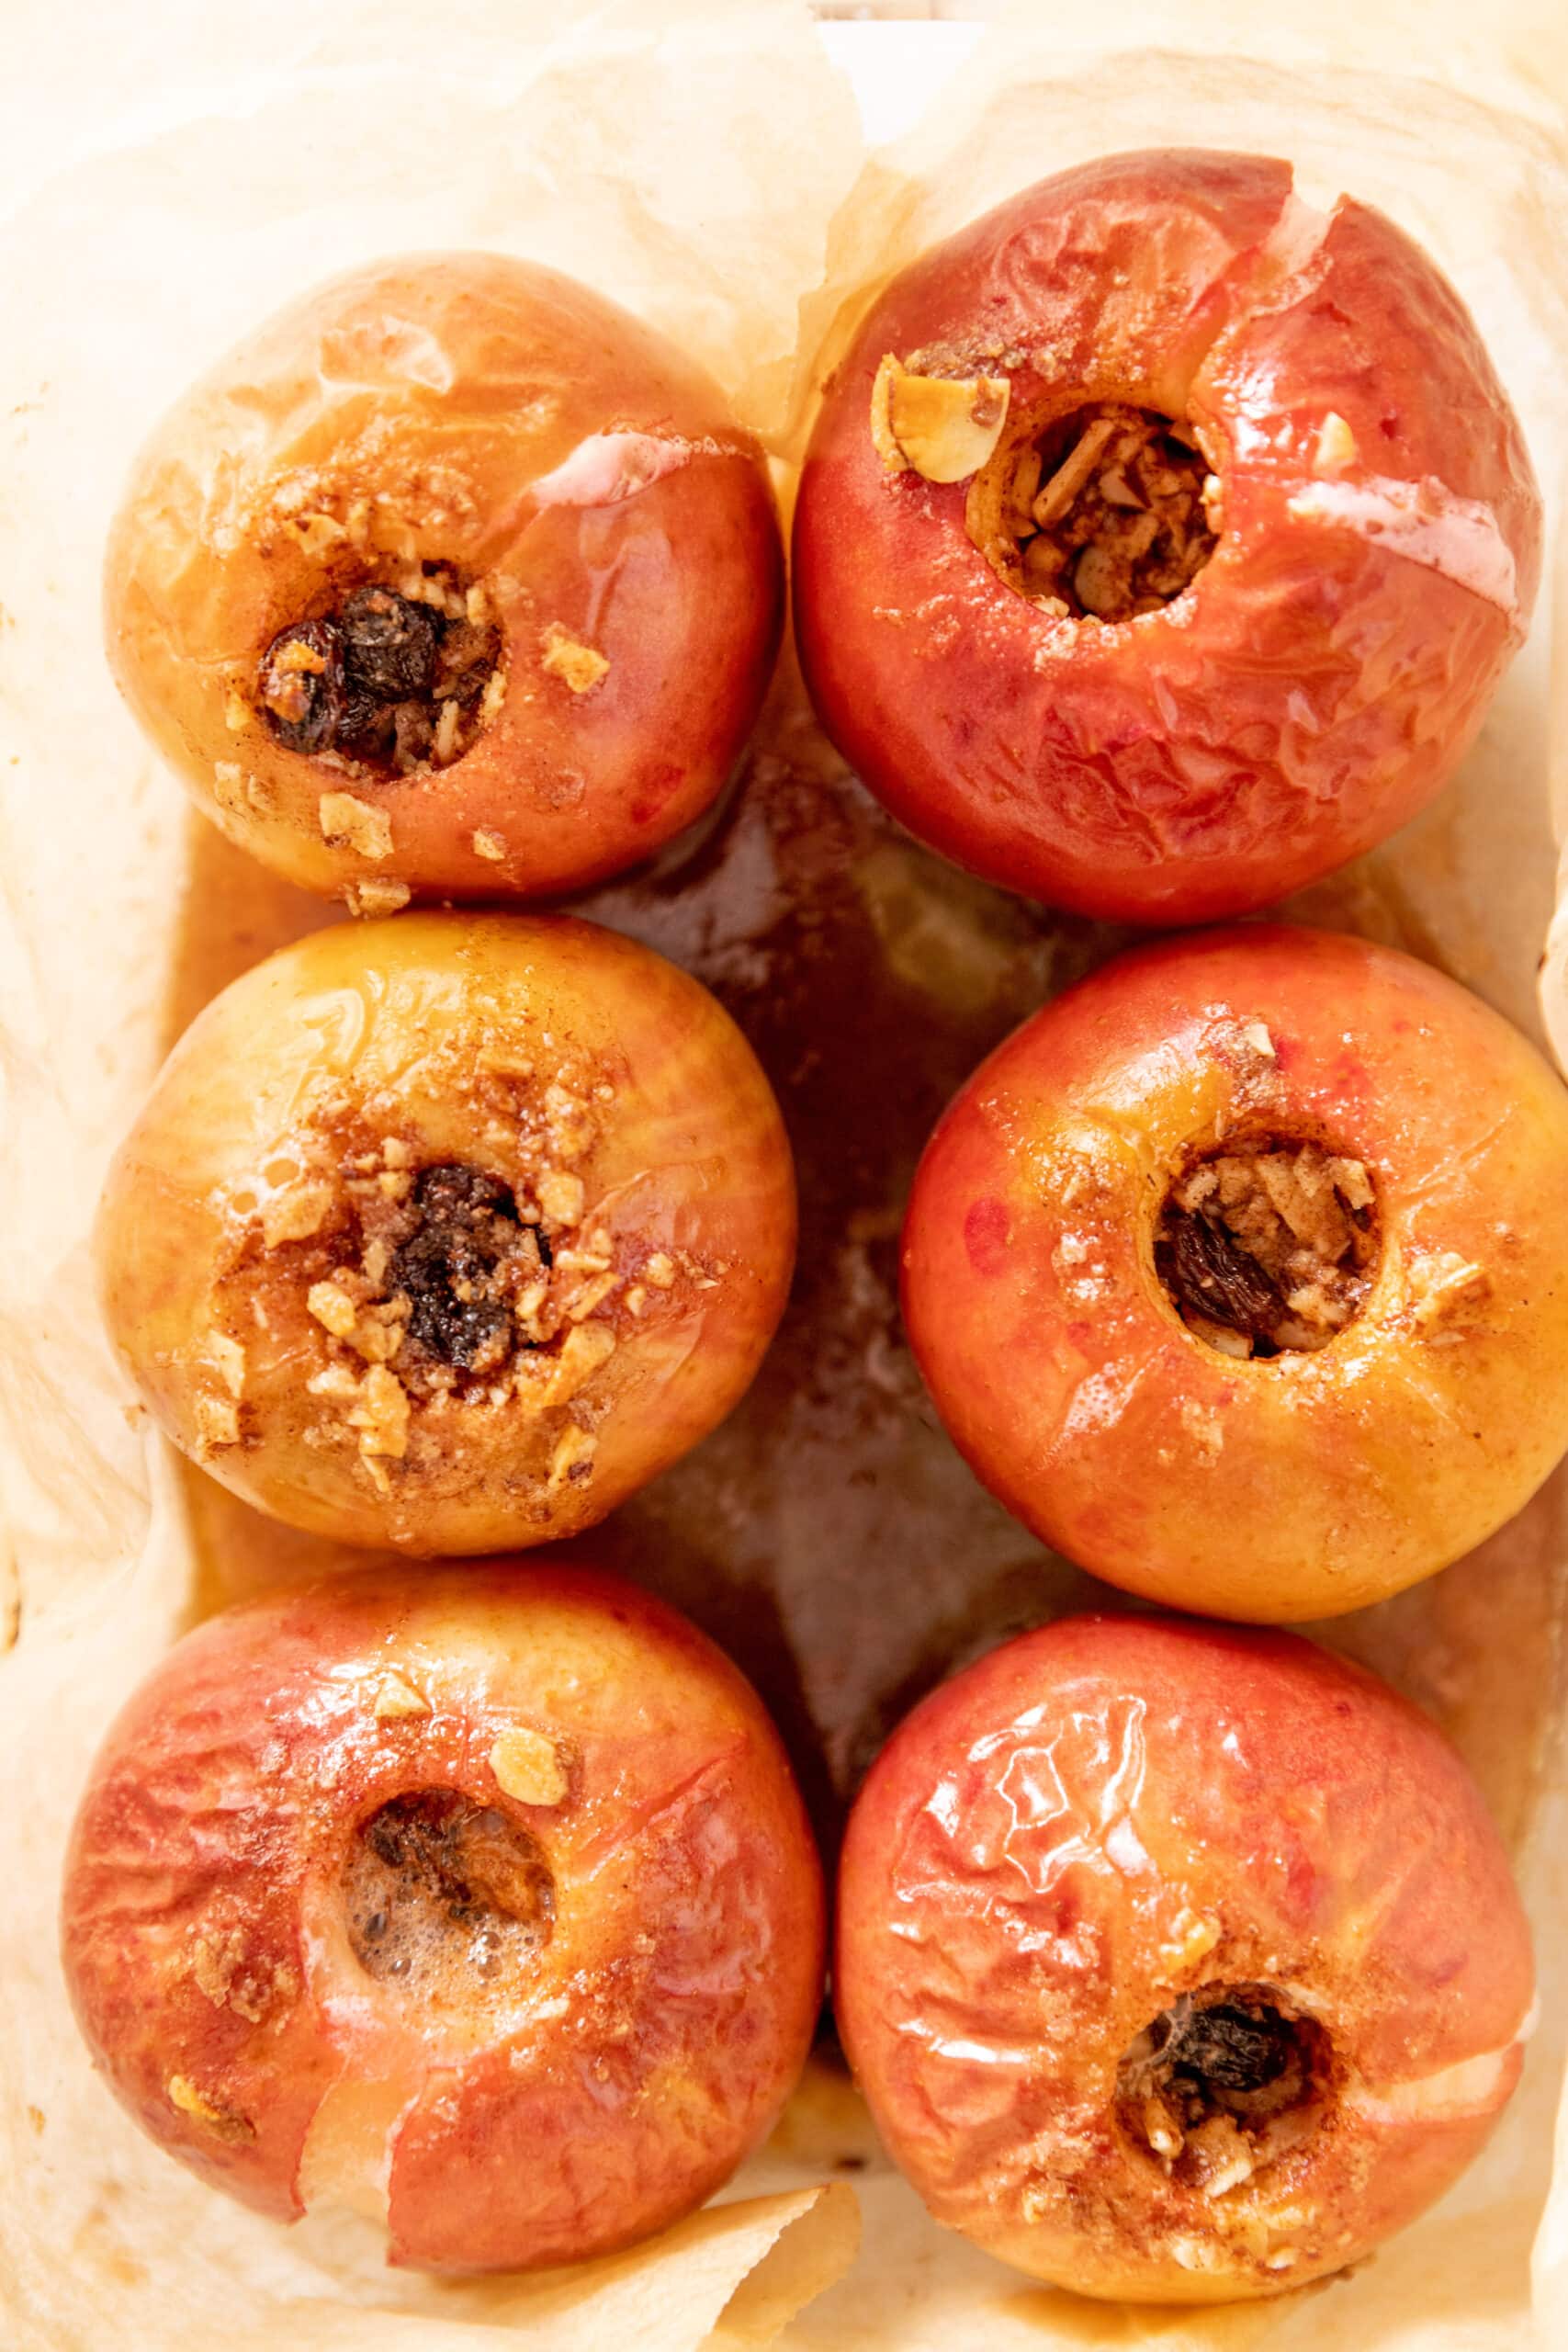 Baking dish lined with parchment paper with 6 filled and baked apples. 